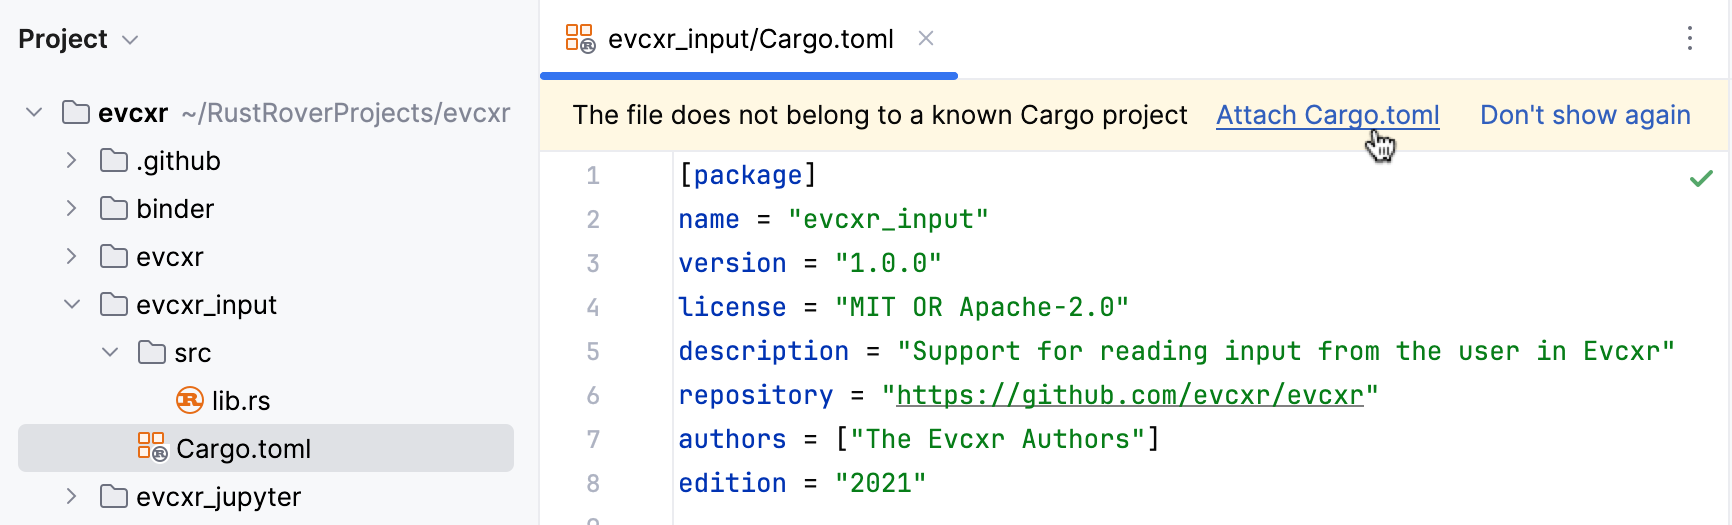 Attaching a Cargo project via editor notification